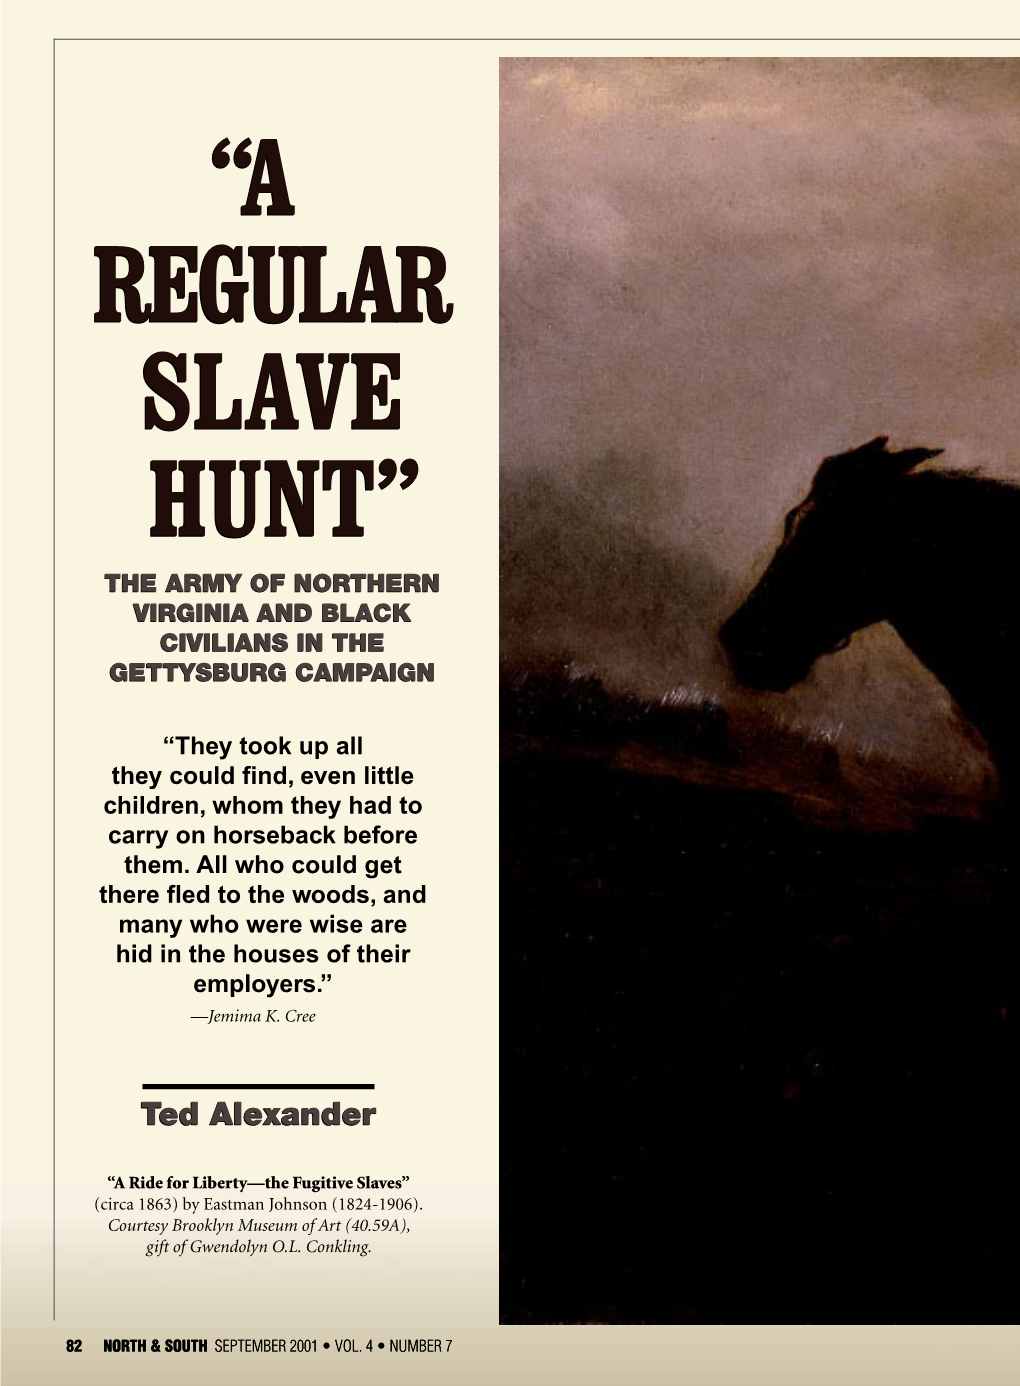 A Regular Slave Hunt” the Army of Northern Virginia and Black Civilians in the Gettysburg Campaign